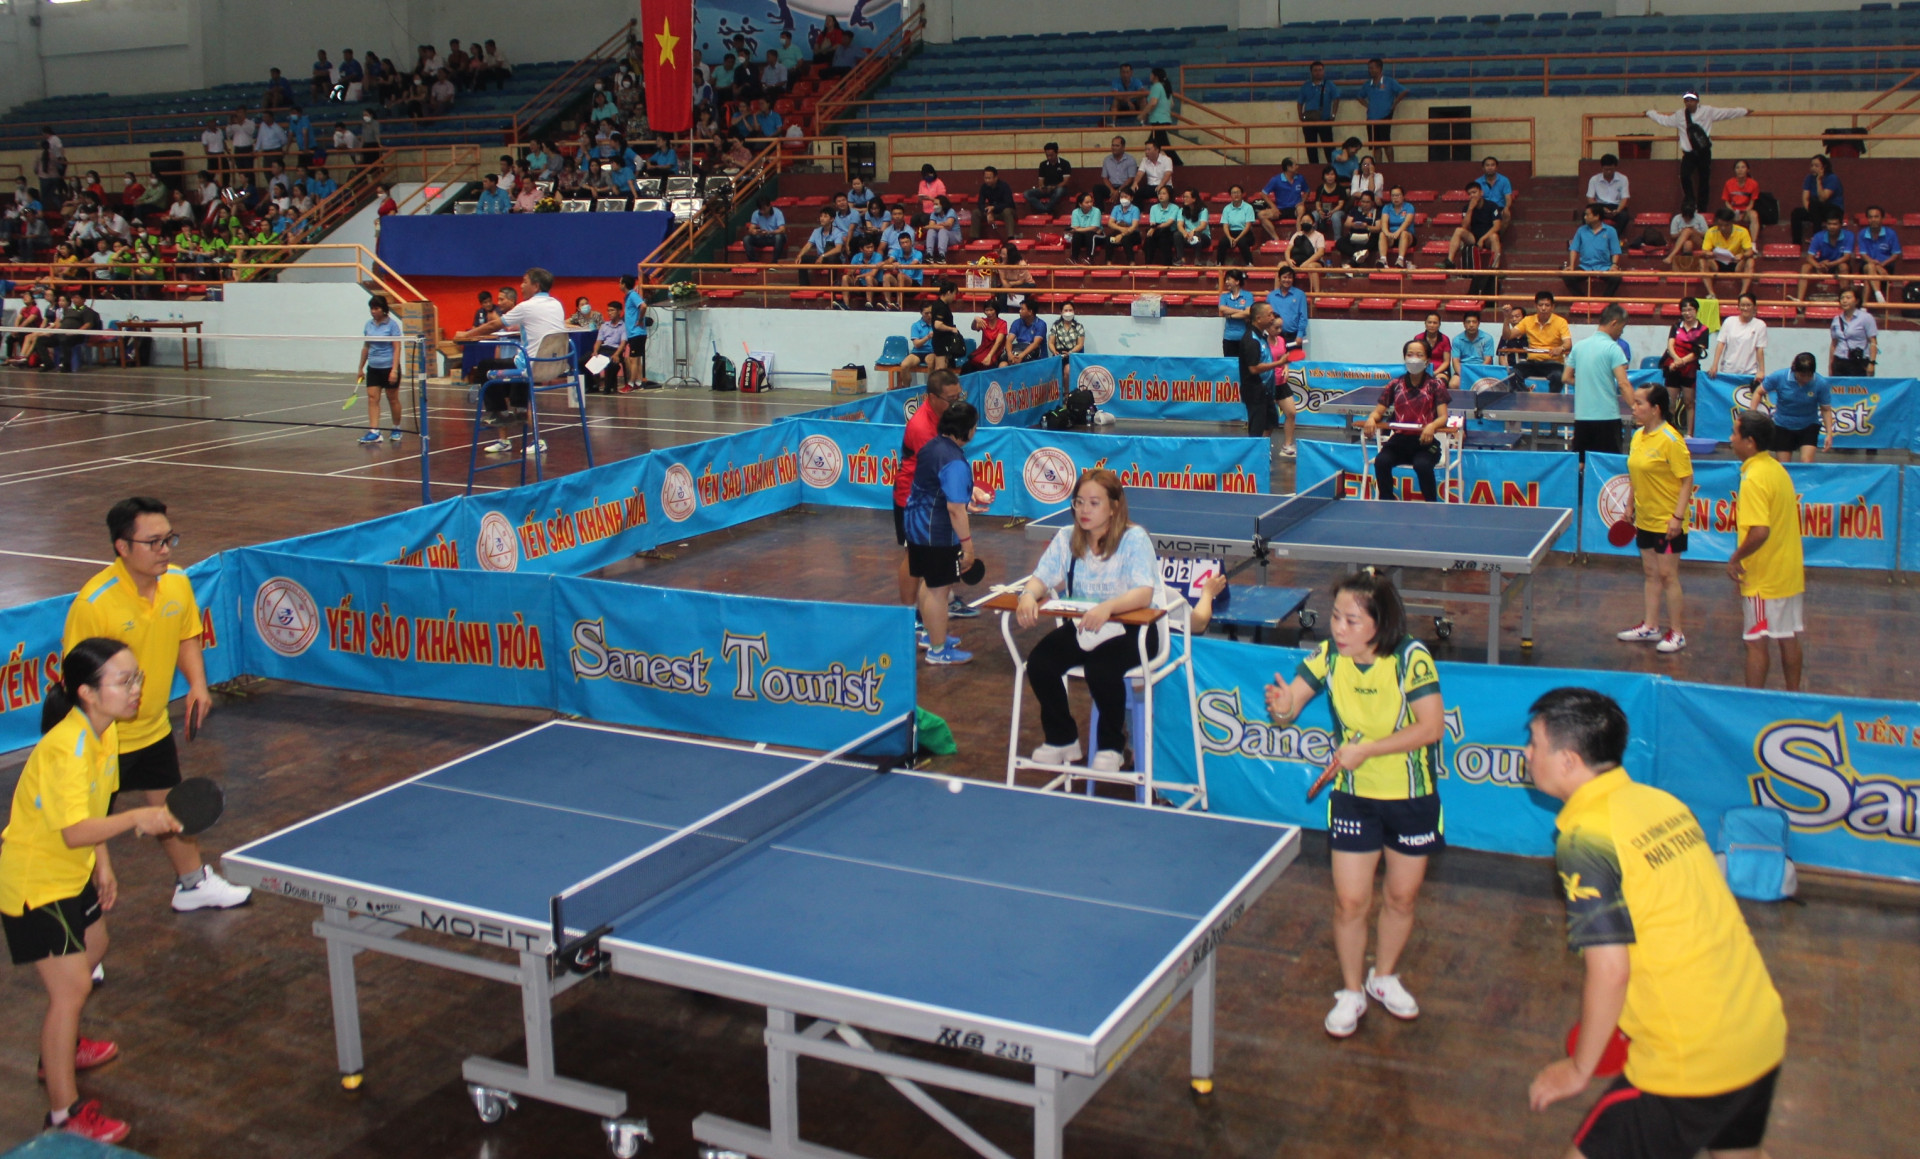 Players playing table tennis…